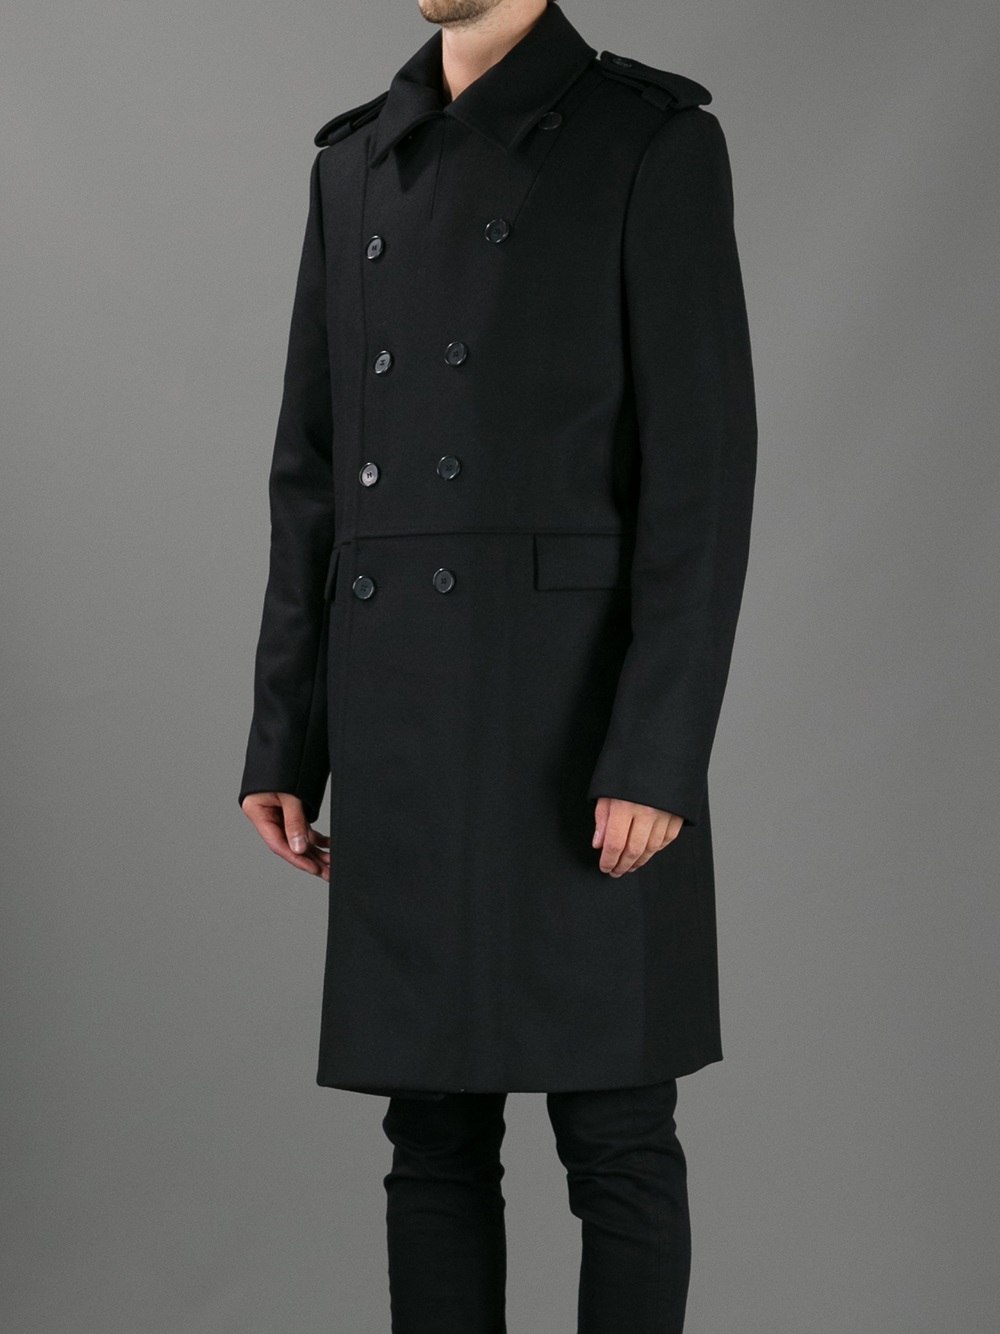 Lyst - Givenchy Wool Trench Coat in Black for Men